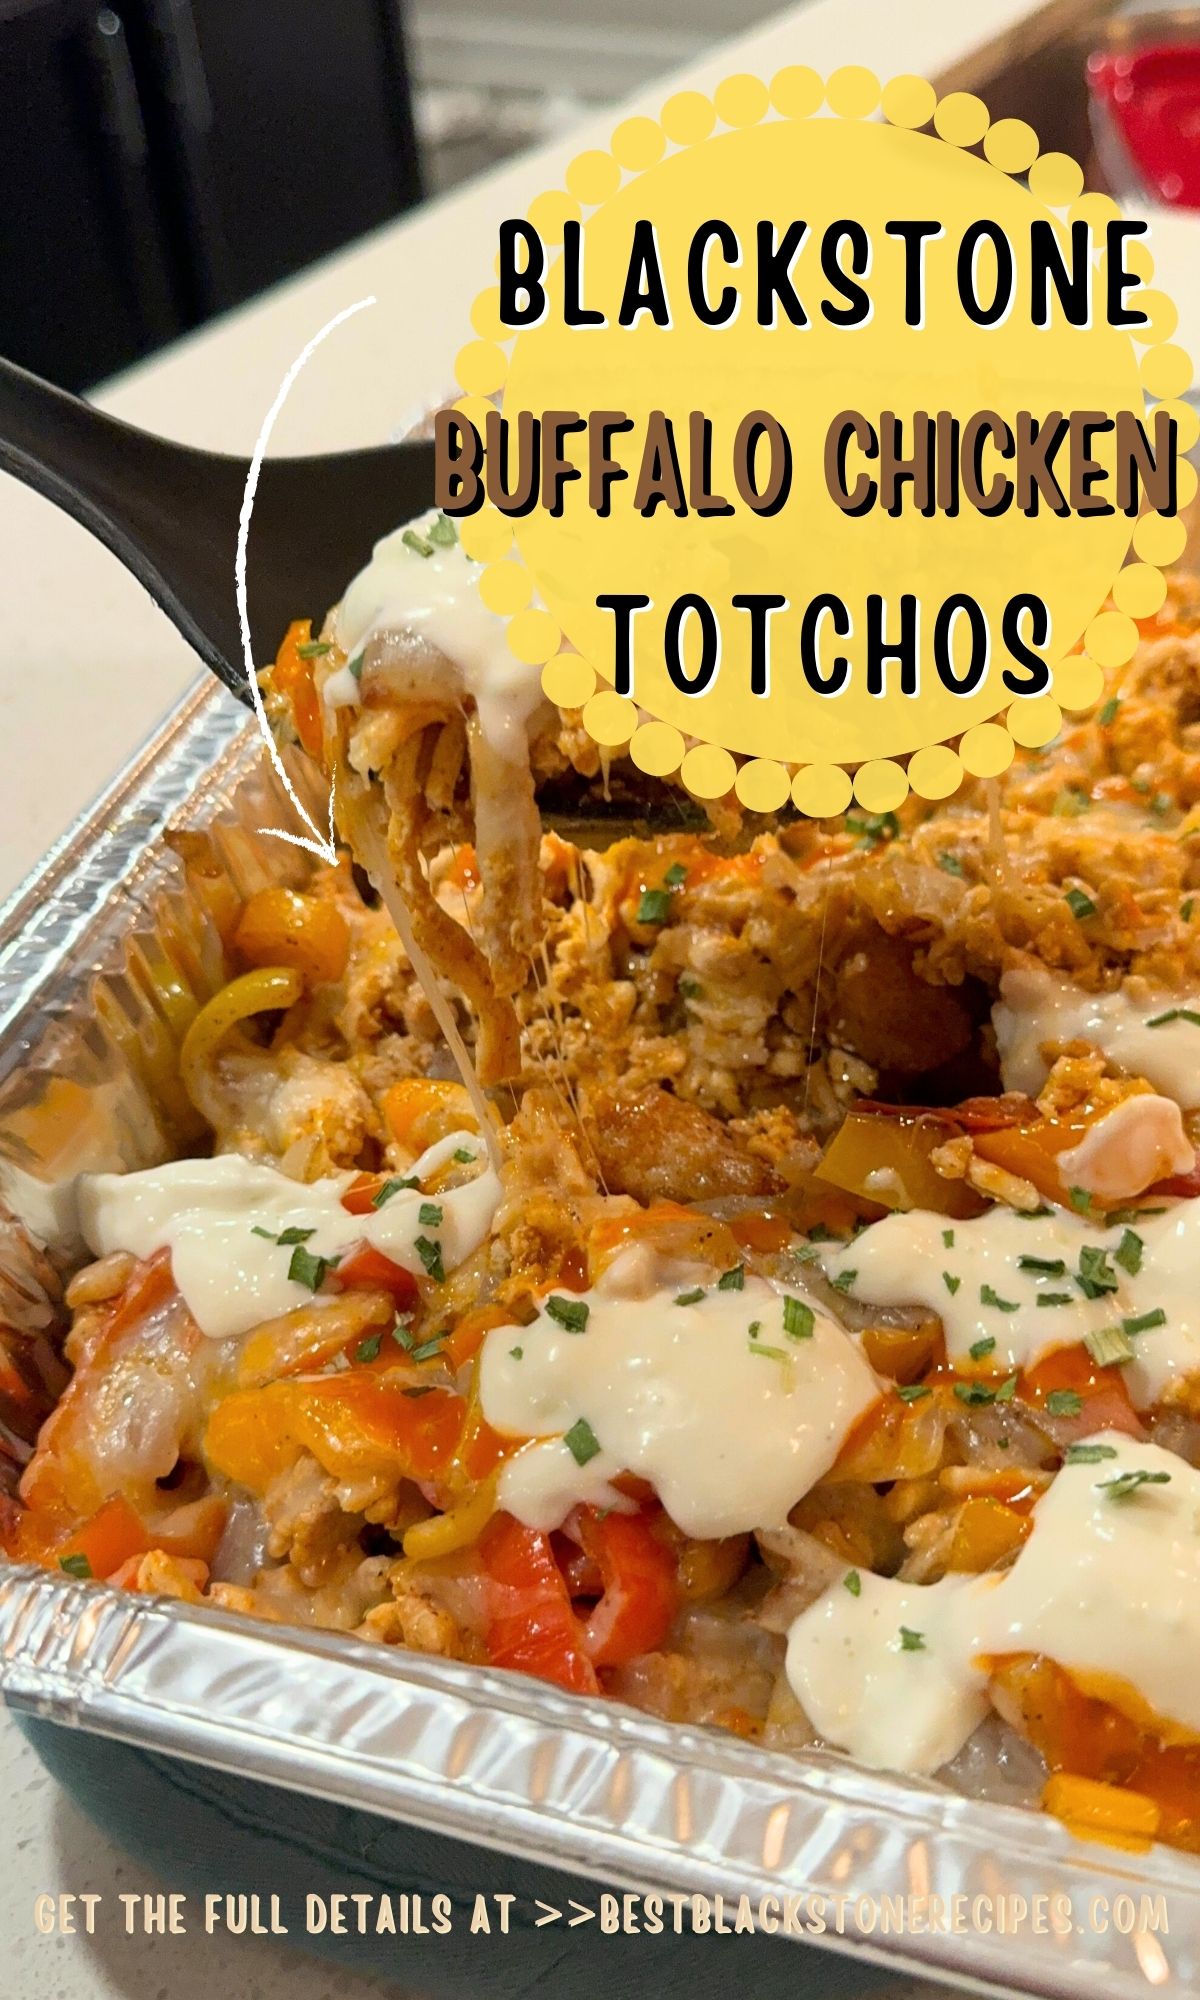 A serving spoon scoops buffalo chicken totchos from a foil tray, topped with melted cheese and diced vegetables, with caption and website details overlaid.